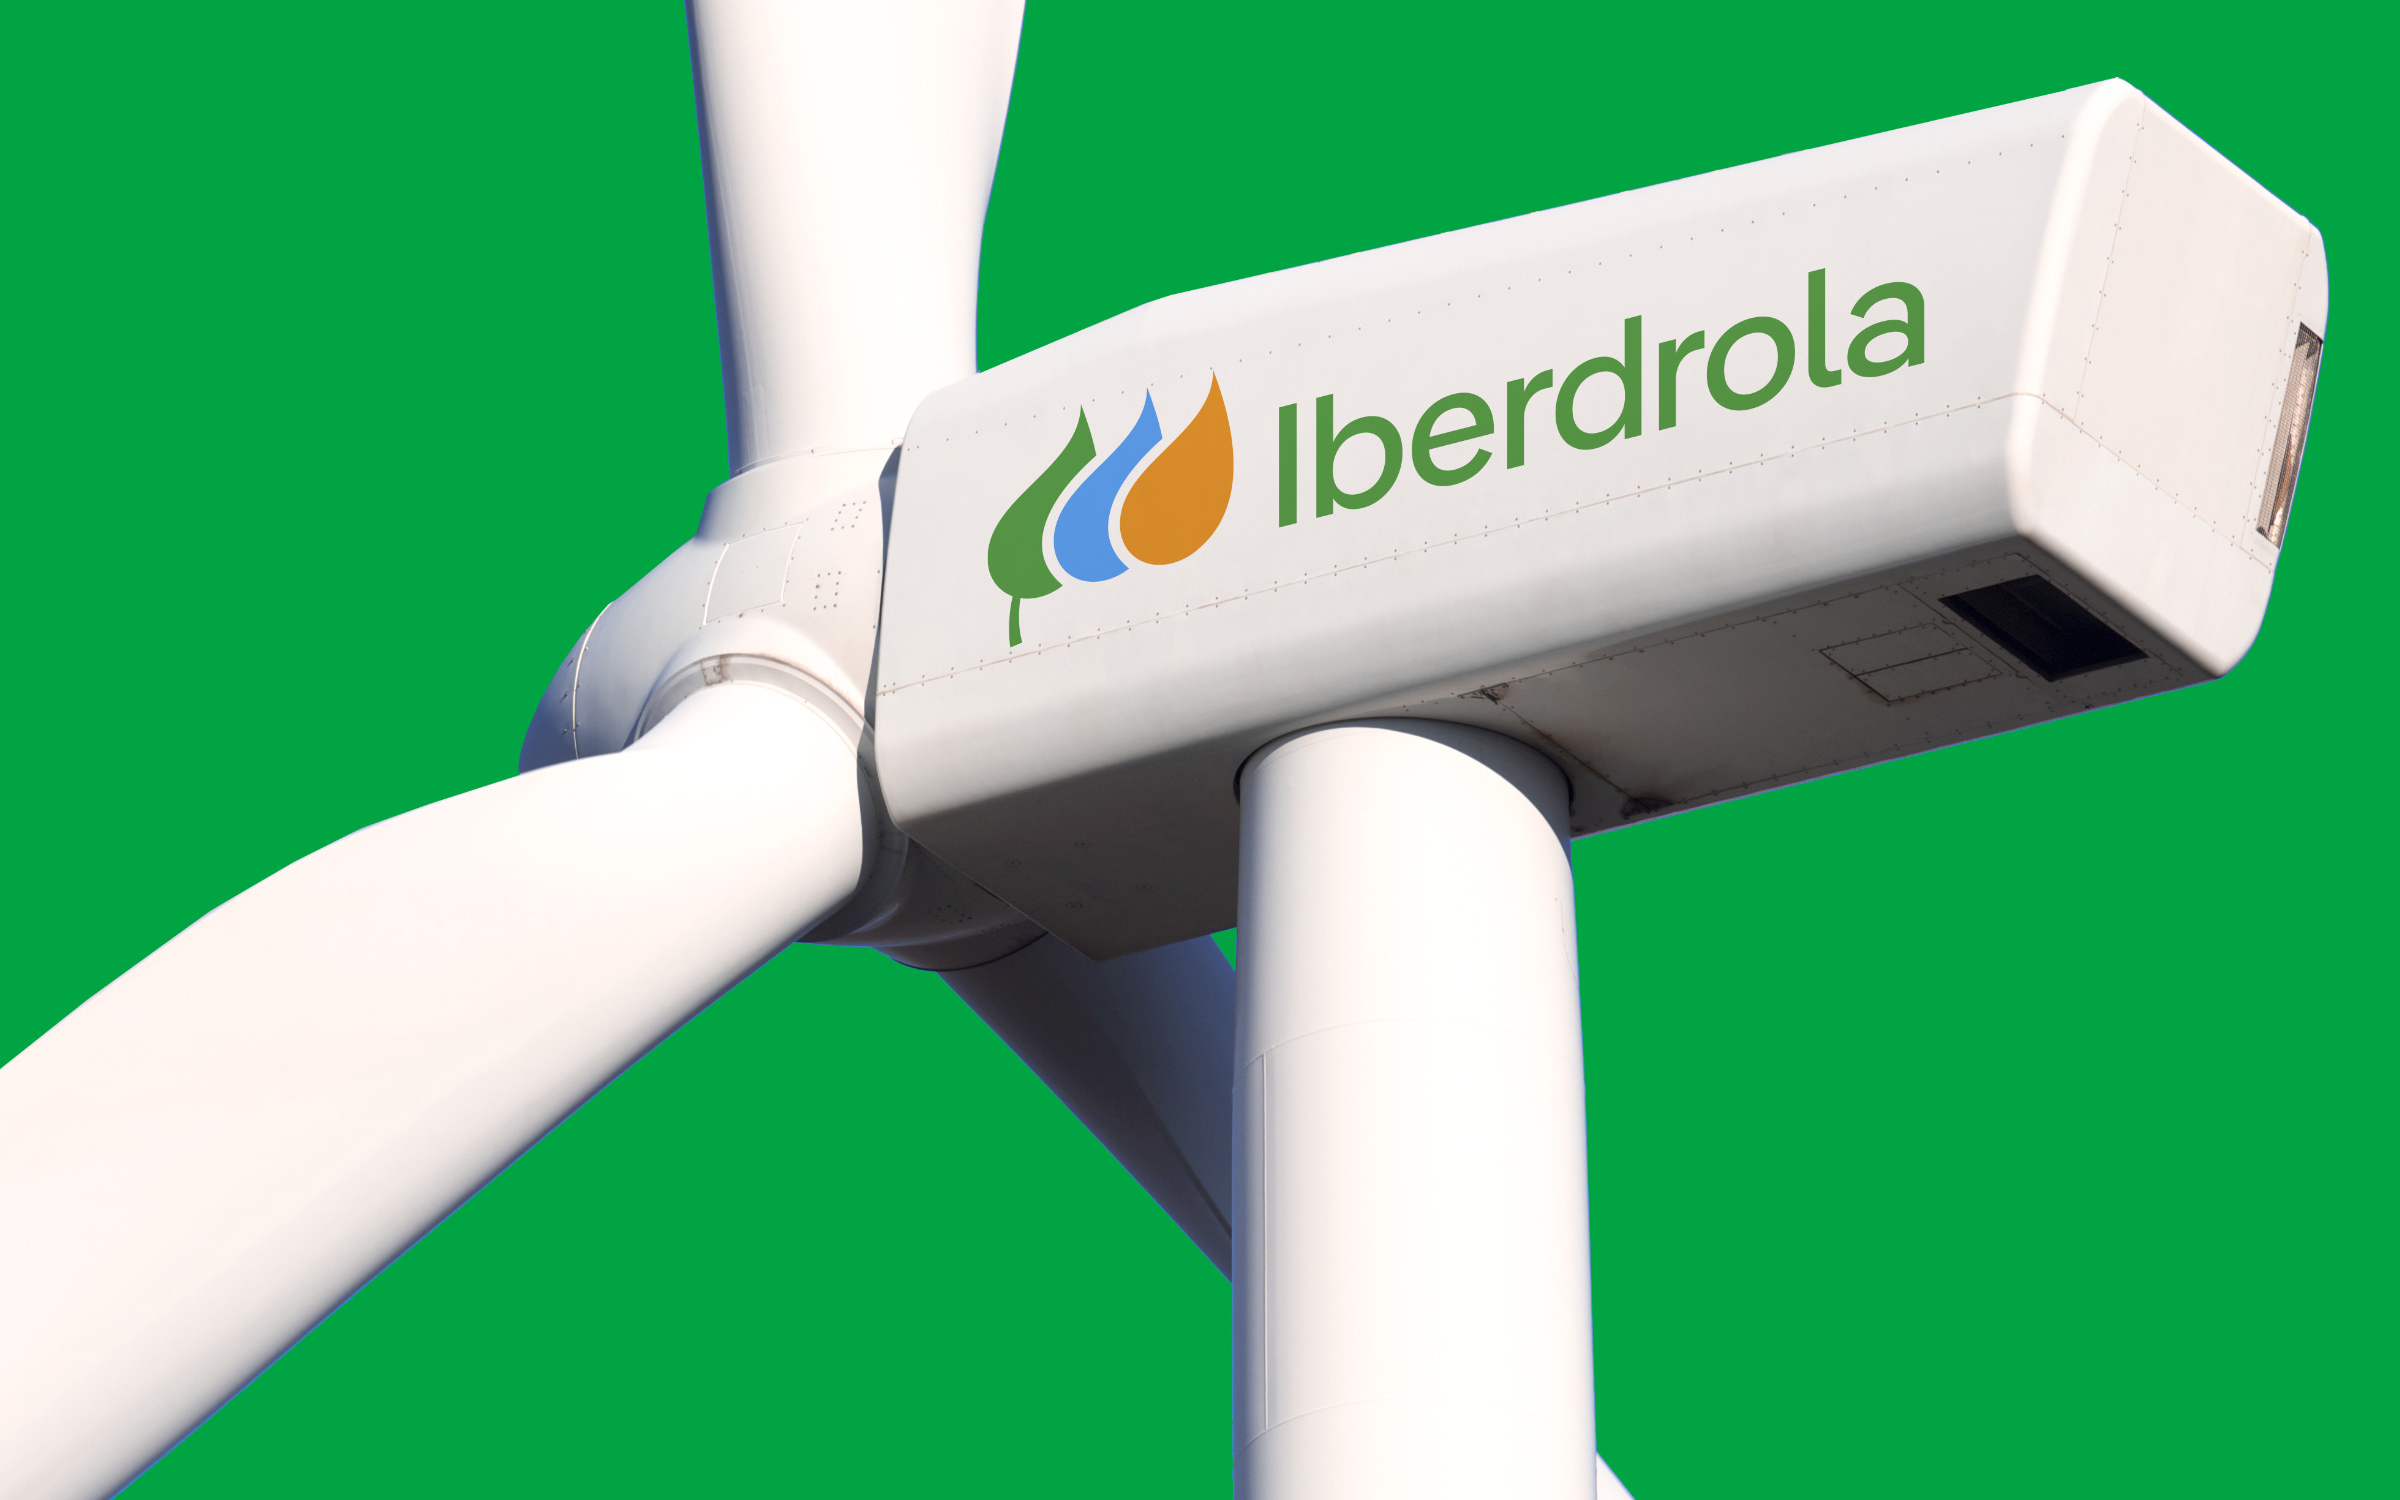 A subtly adapted typeface Pangea (IberPangea) in use for the visual identity of the fifth largest energy company in the world, Iberdrola